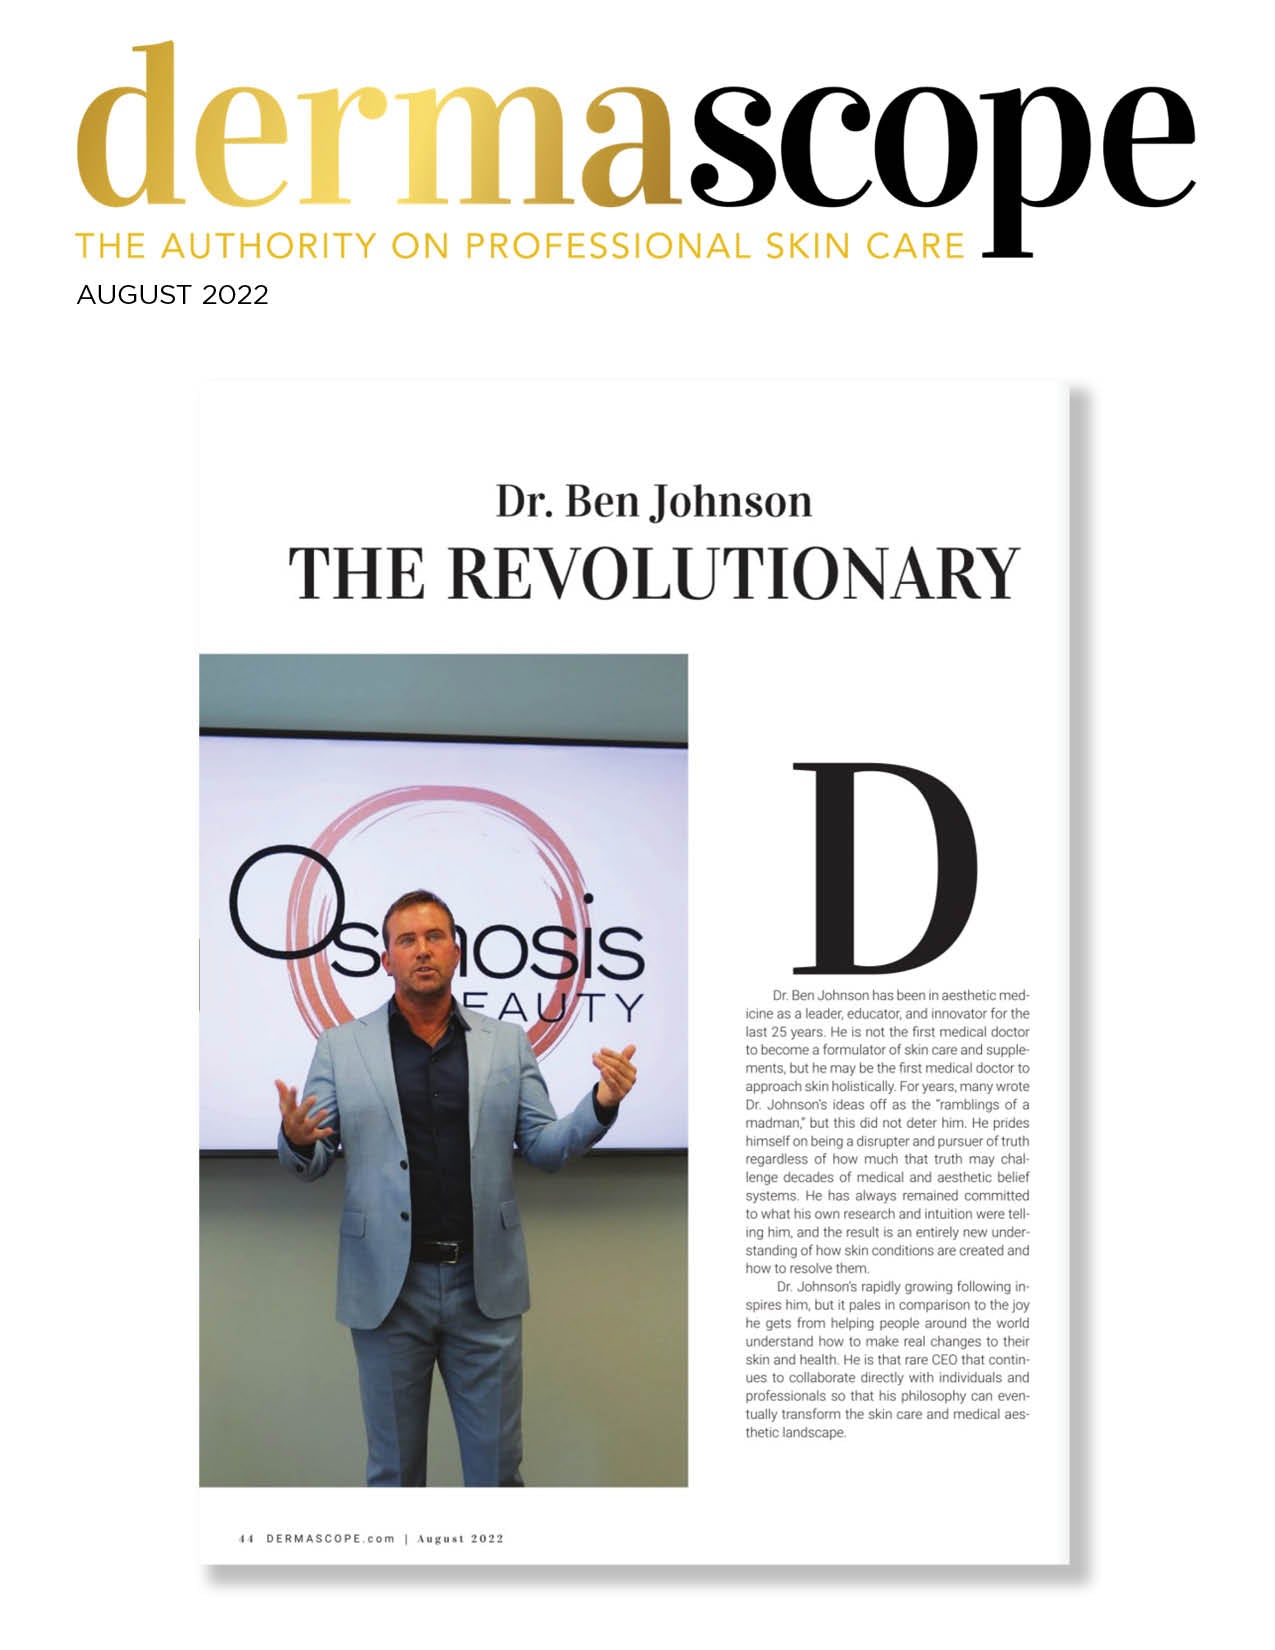 Dr Ben Johnson/Osmosis Beauty was featured in the August 2022 issue